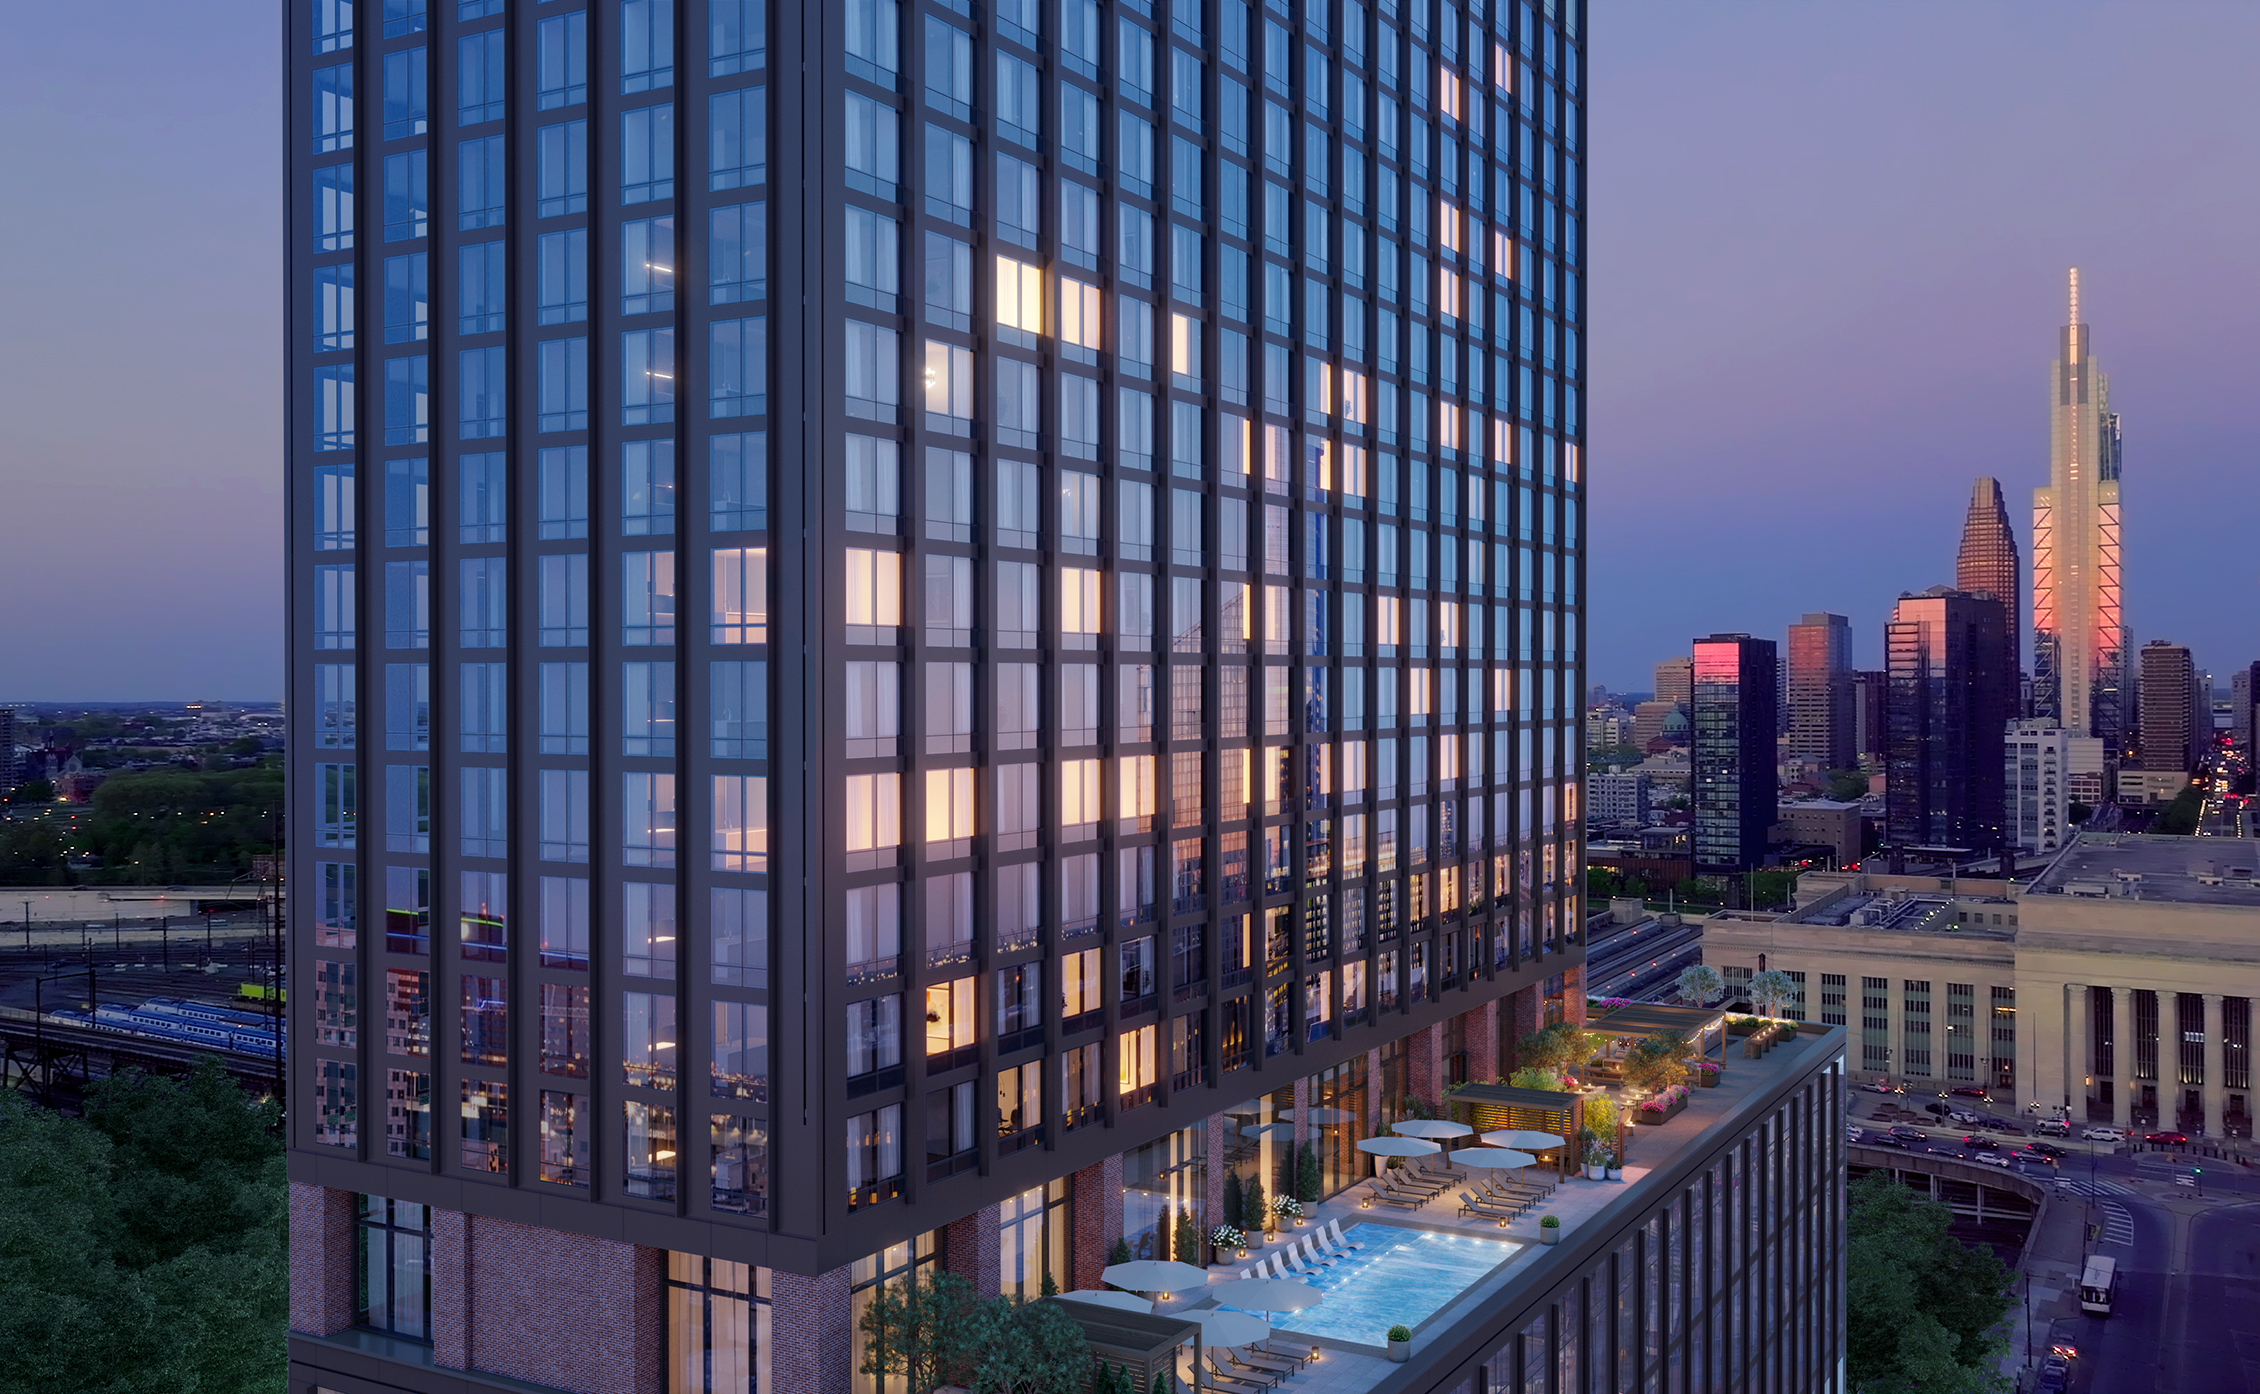 All About Avira, Schuylkill Yards' First Residential Offering